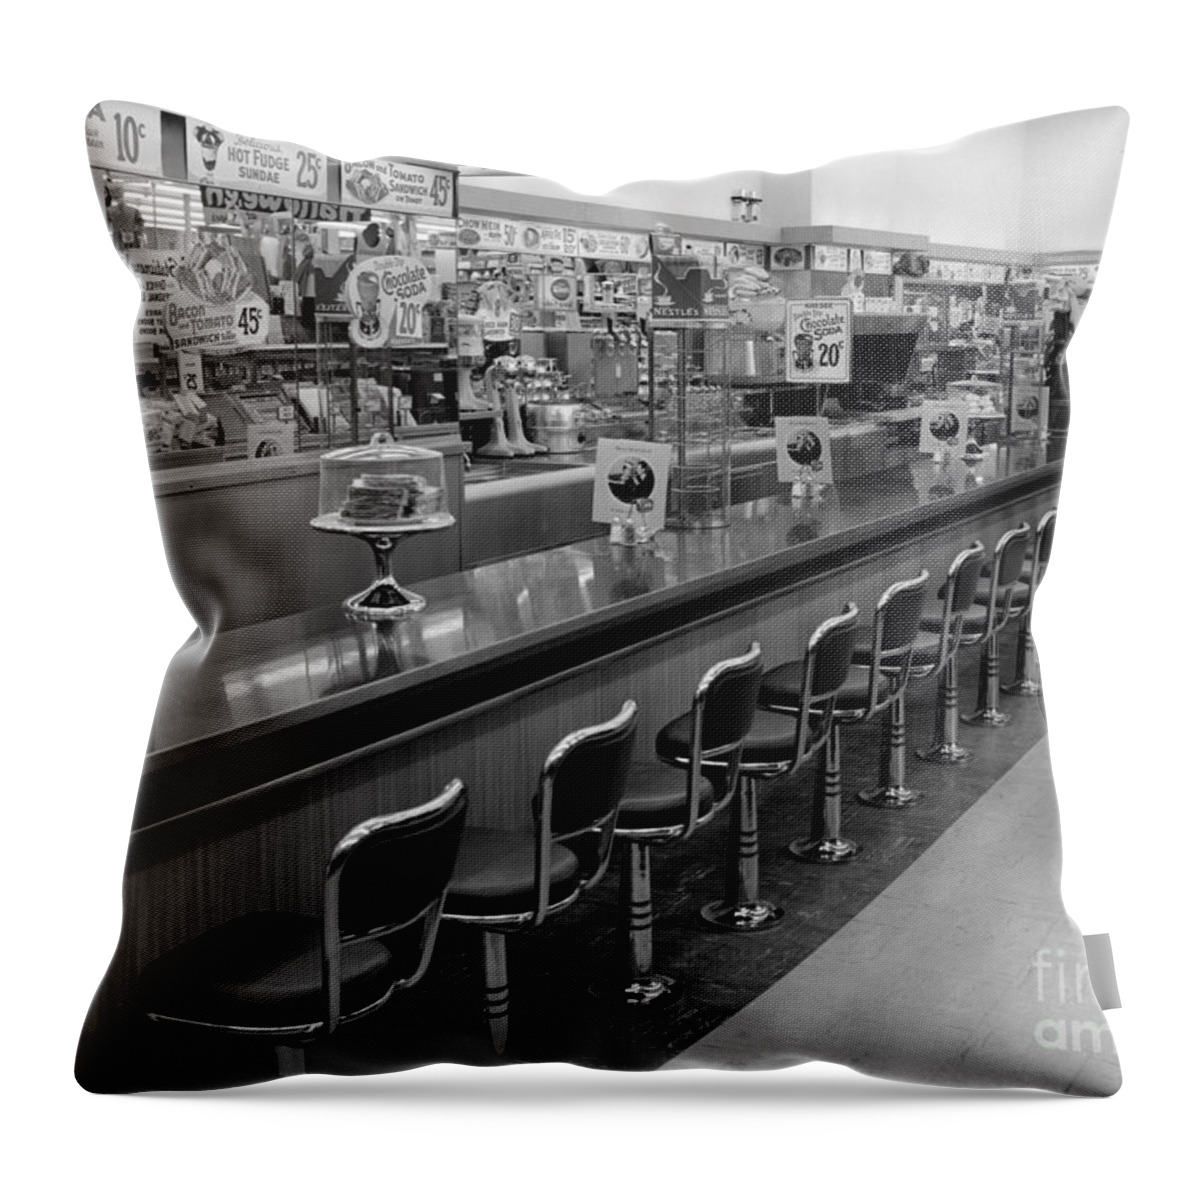 1950s Throw Pillow featuring the photograph Empty Diner, C.1950-60s by H. Armstrong Roberts/ClassicStock